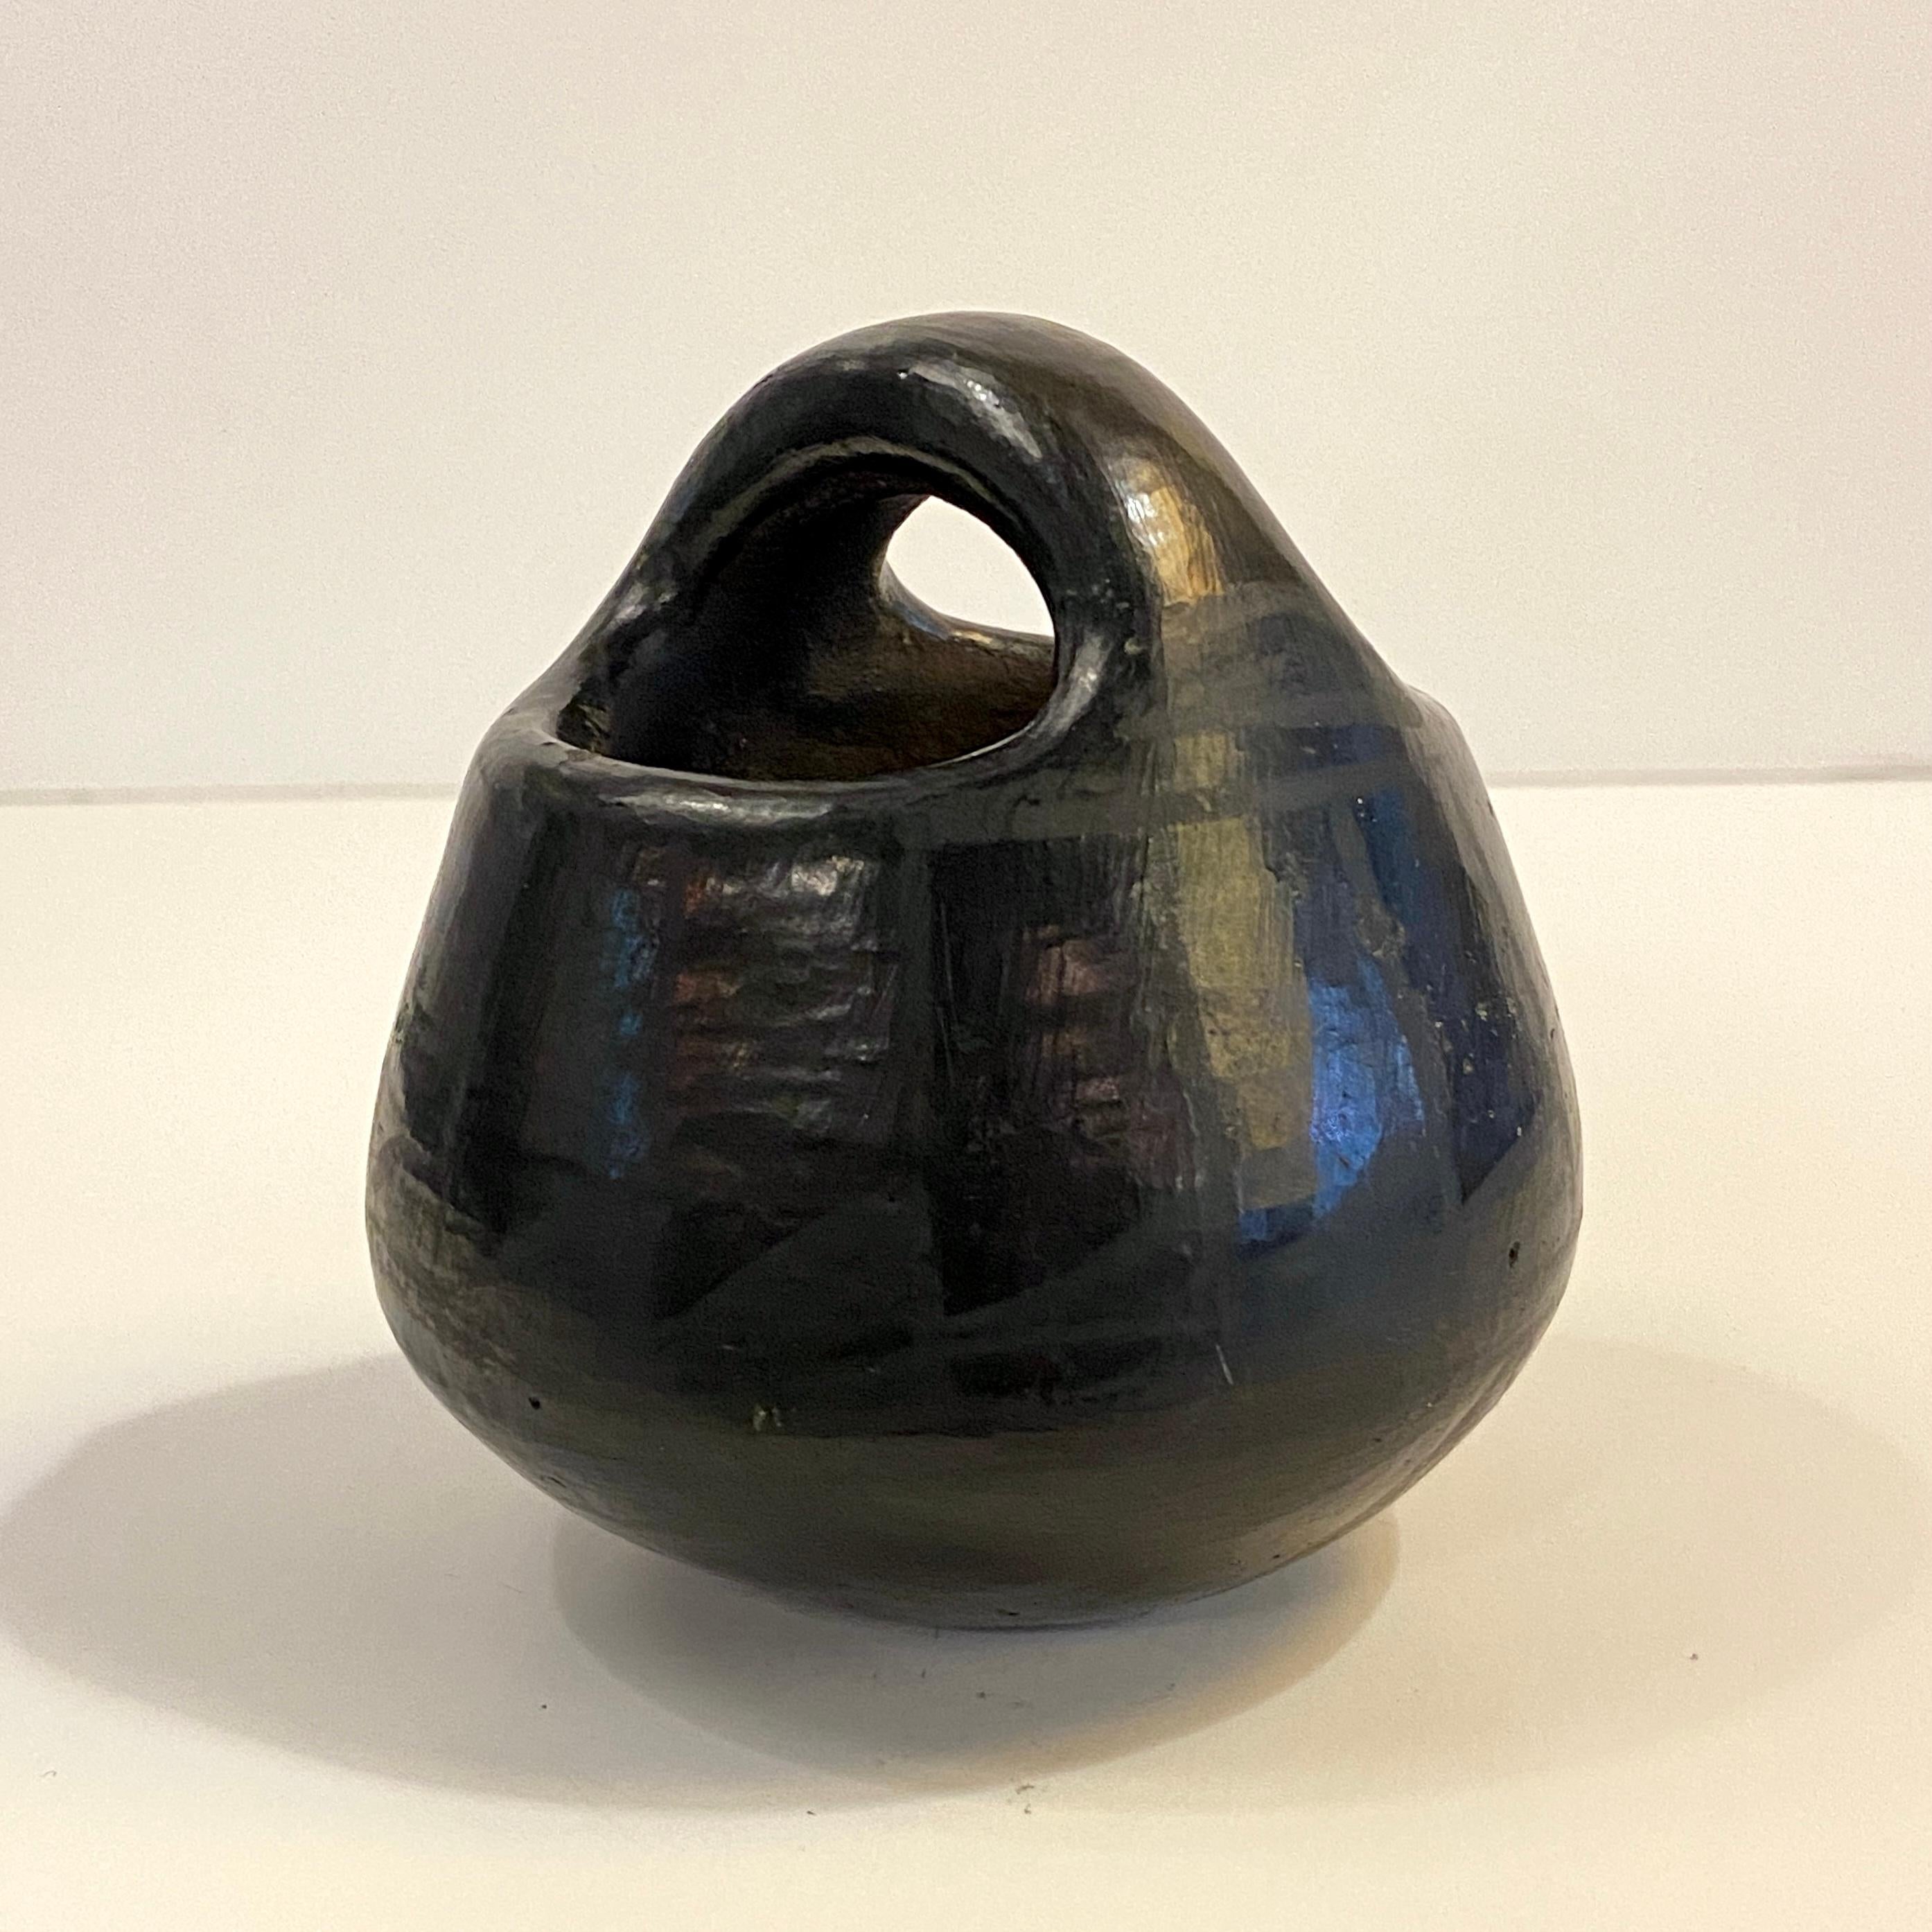 Petite, mid-century, handmade Native American art pottery vessel in the shape of a basket by Josefina Martinez of Santo Domingo Pueblo, New Mexico features a smooth, round surface in semi-gloss, black glaze with a subtle pattern. Signed JM SDP,